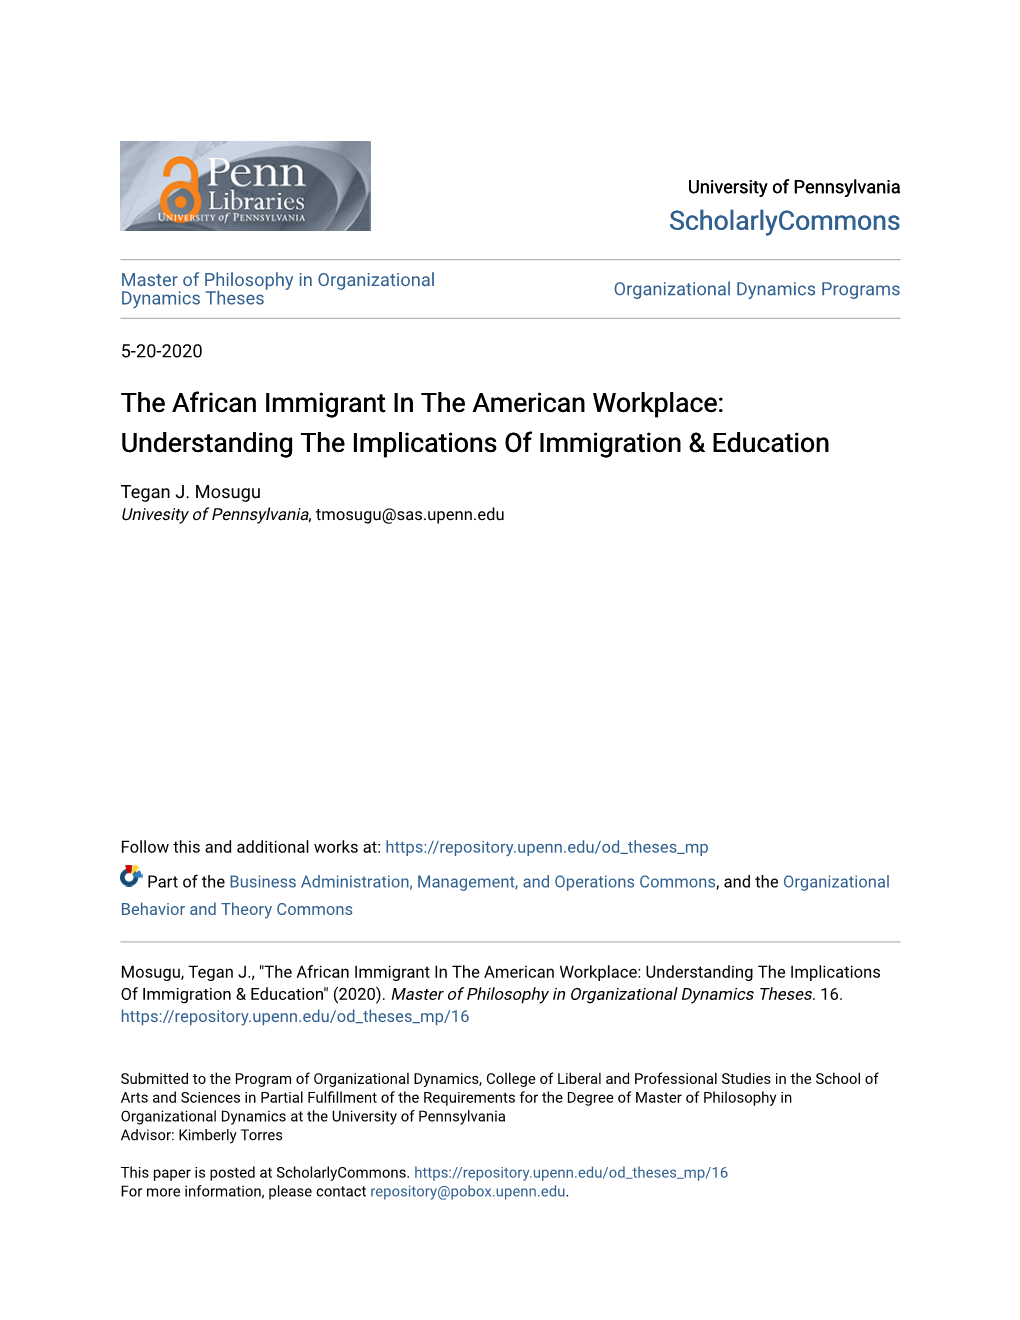 The African Immigrant in the American Workplace: Understanding the Implications of Immigration & Education